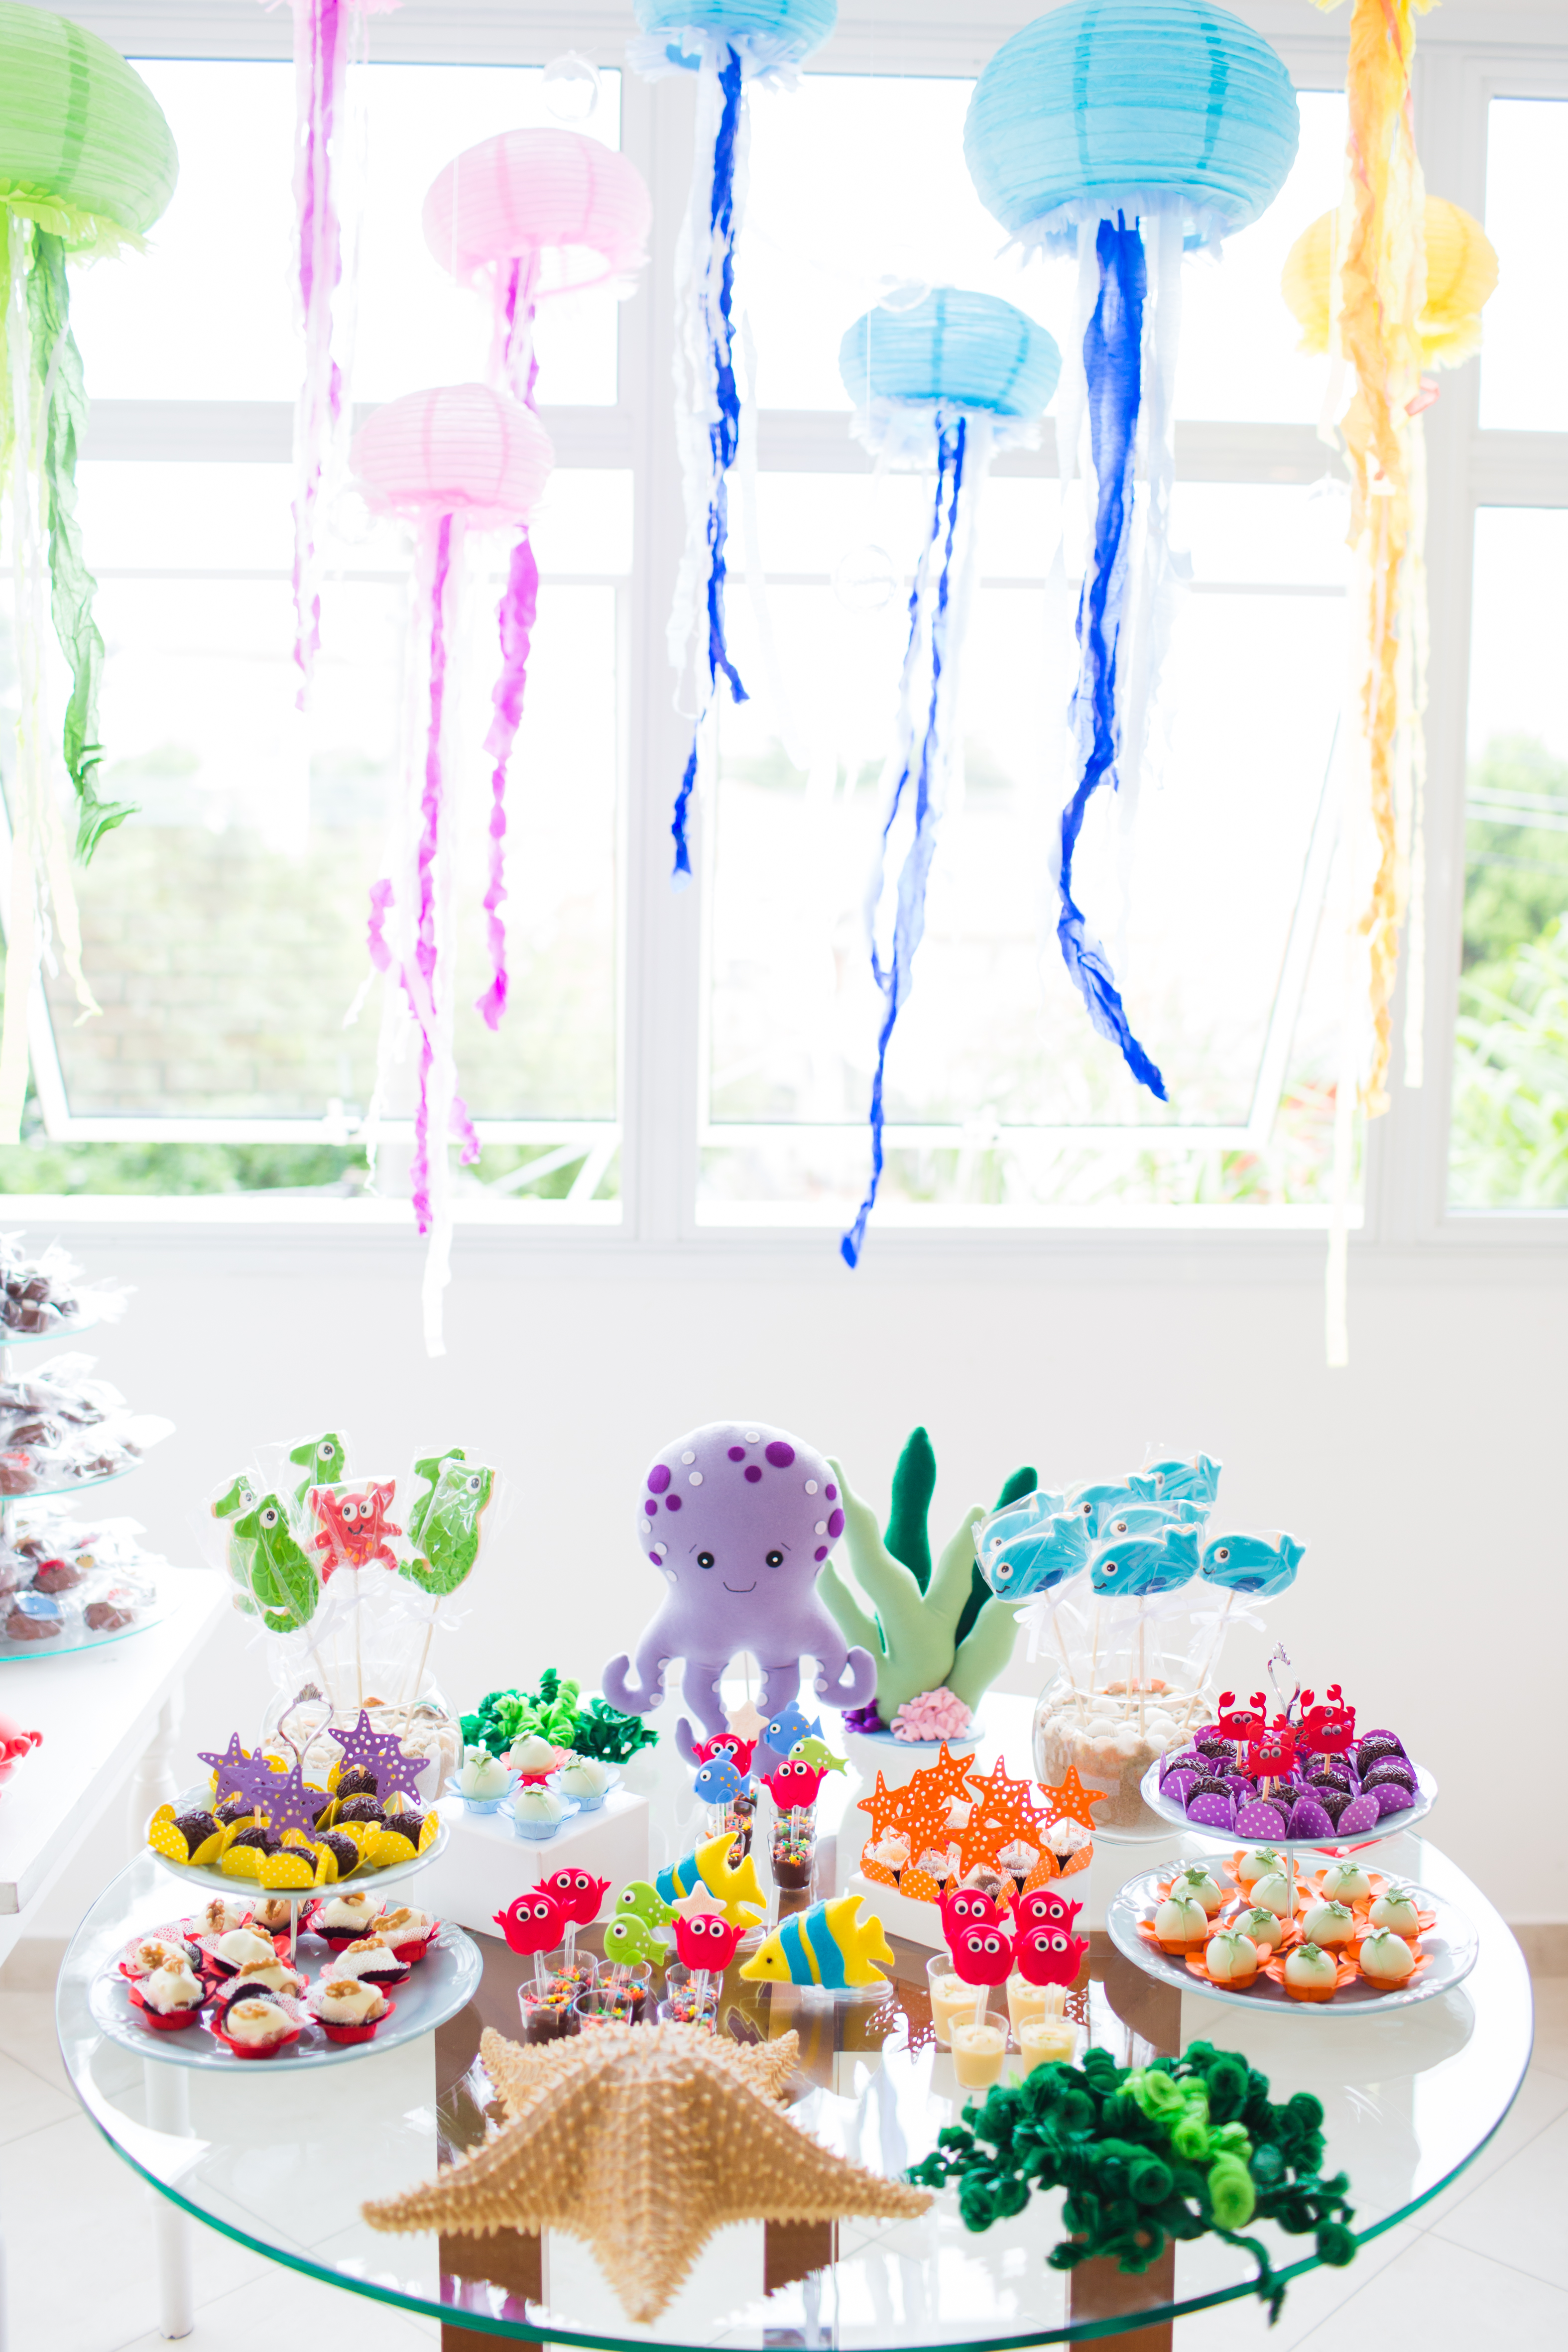 Lis and Her Under the Sea Friends 2nd Birthday Party - Project Nursery